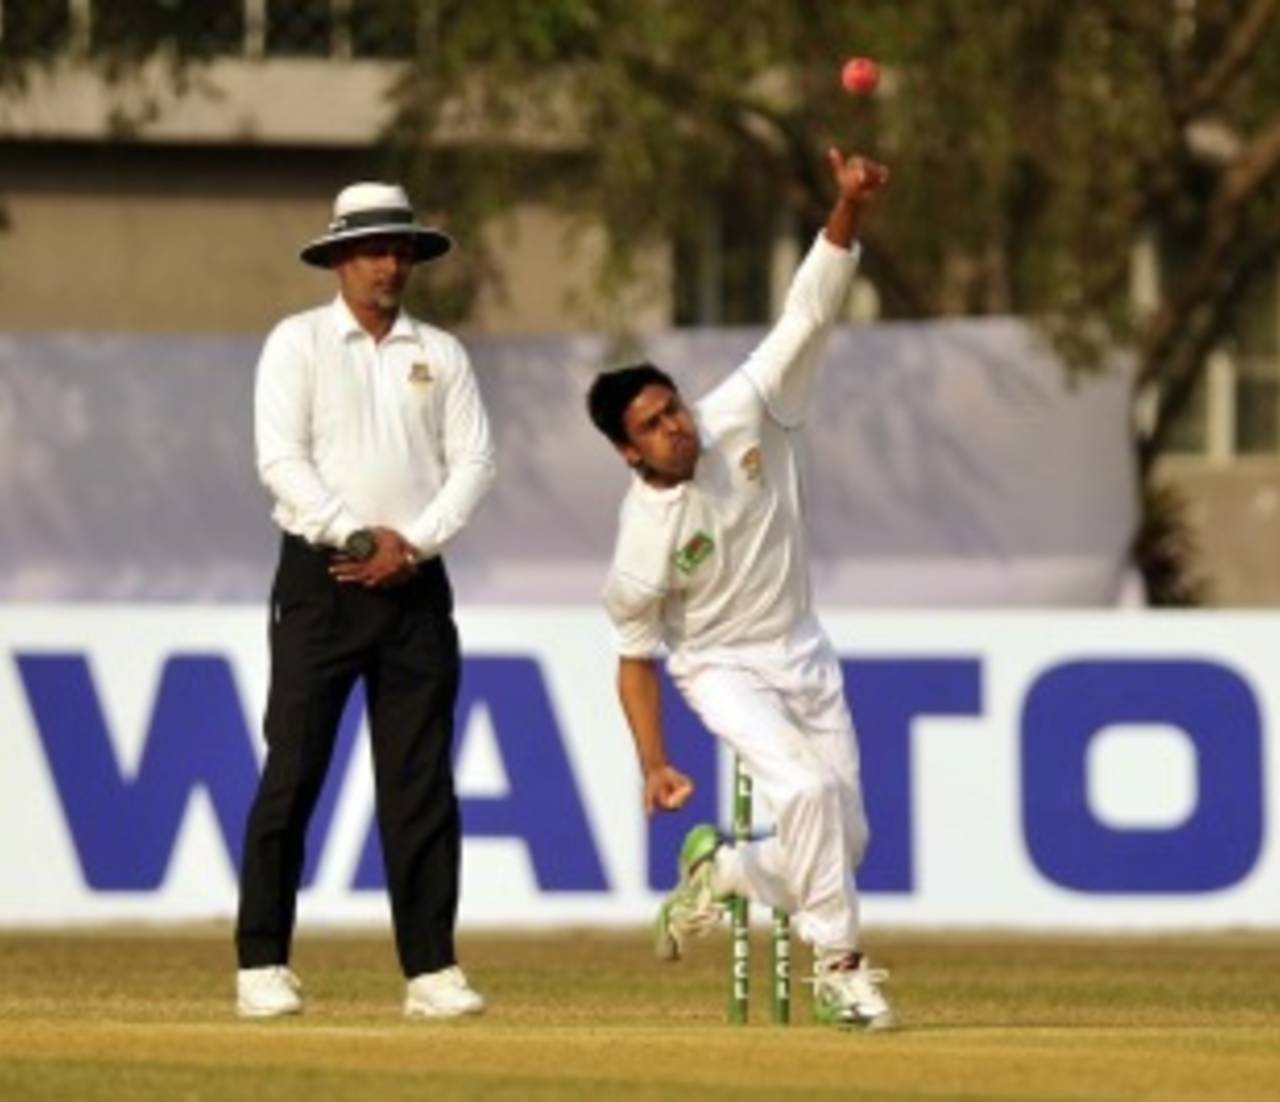 Taijul Islam is the leading wicket-taker in Bangladesh's domestic cricket this season with 53 scalps&nbsp;&nbsp;&bull;&nbsp;&nbsp;BCB